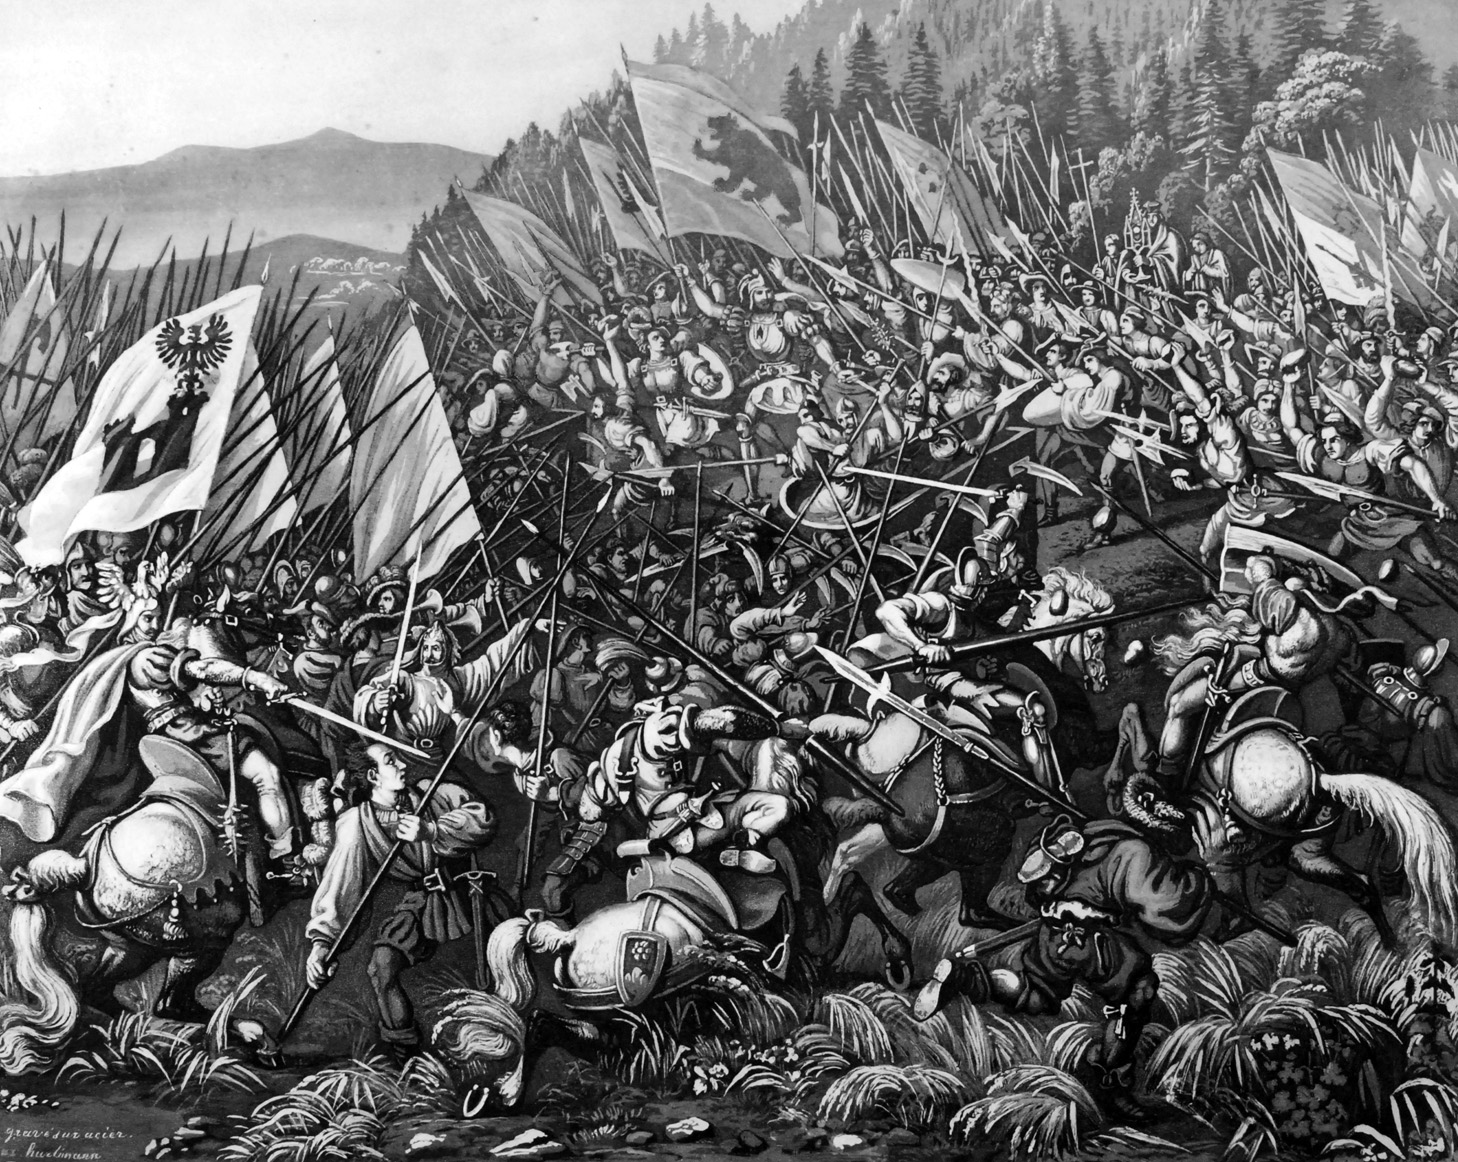 At the Battle of Laupen, the Swiss seized the high ground, which enabled them to launch a devastating downhill charge.